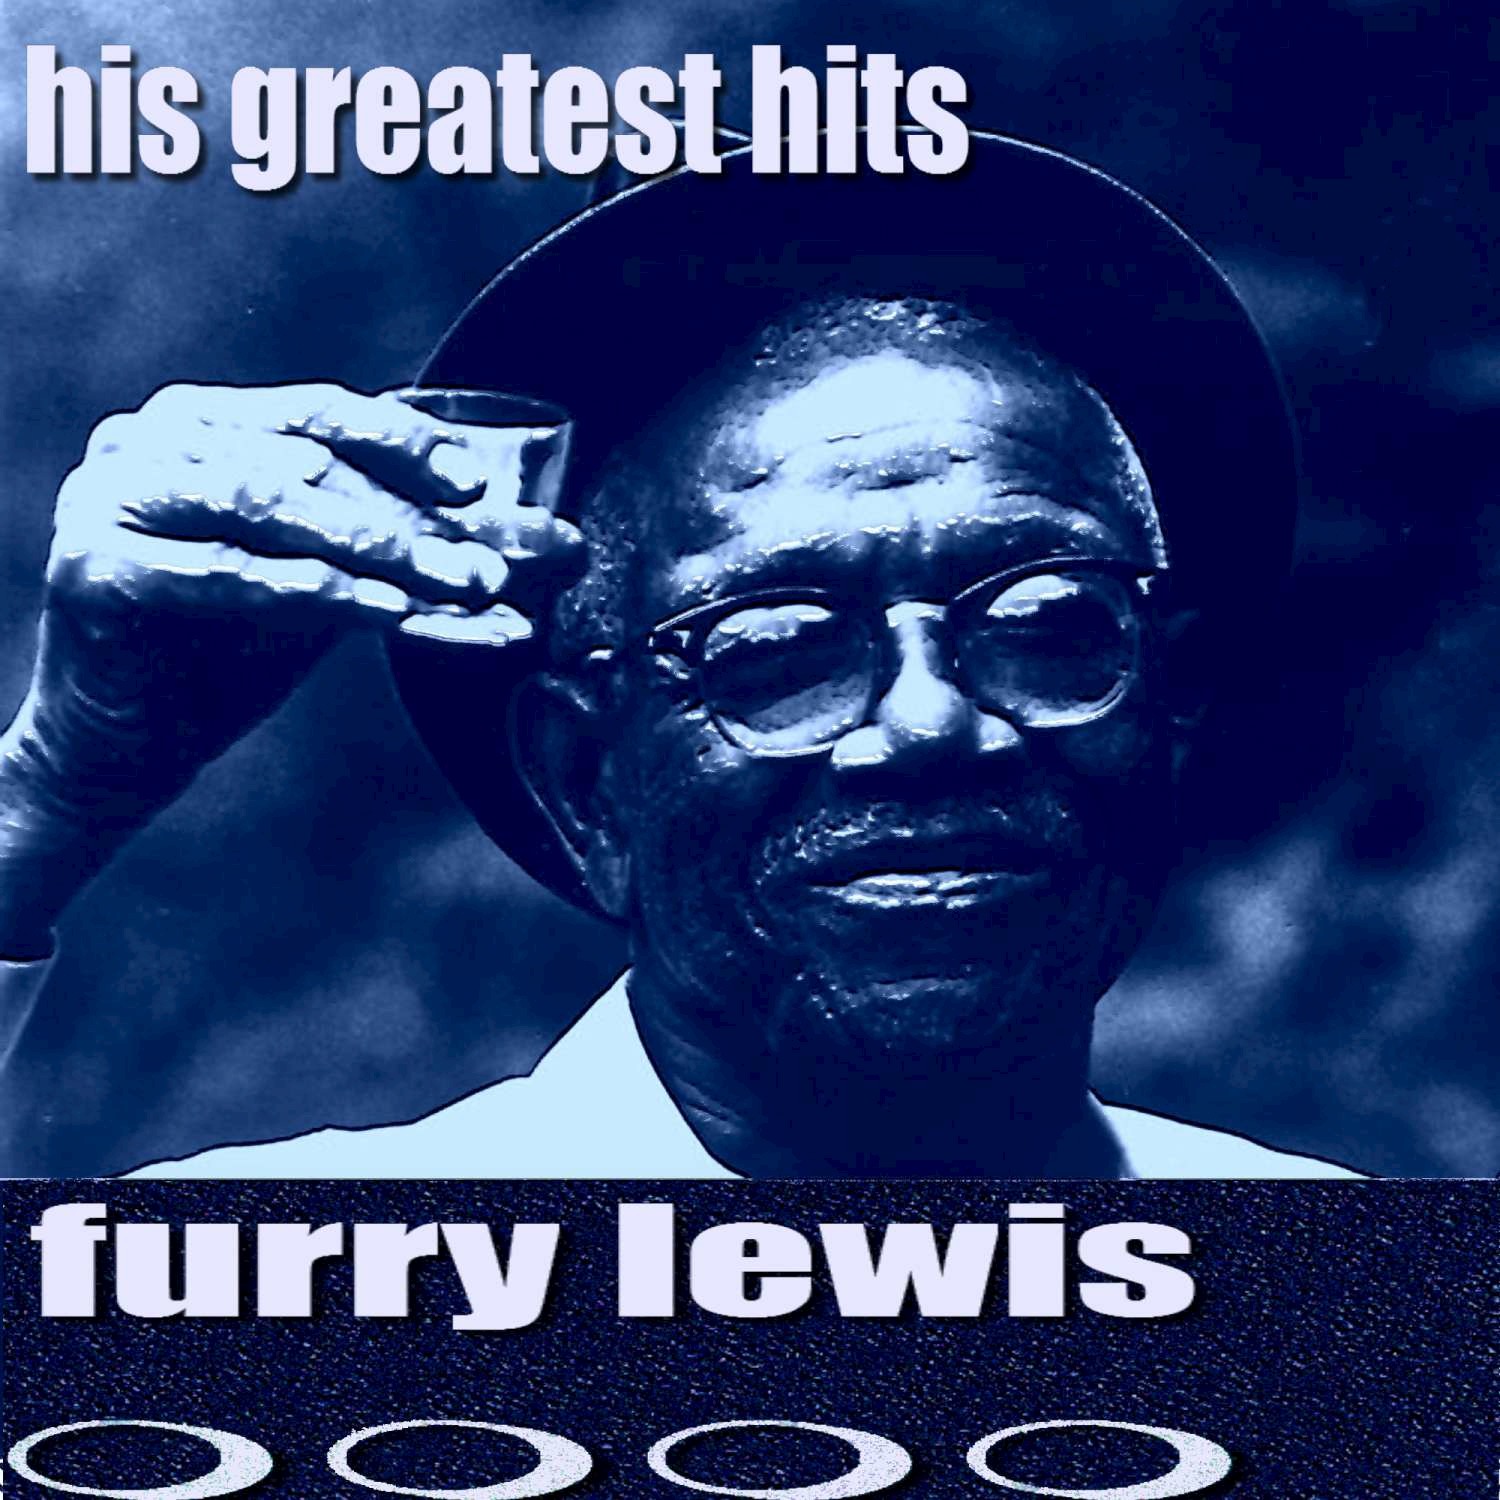 Furry Lewis His Greatest Hits